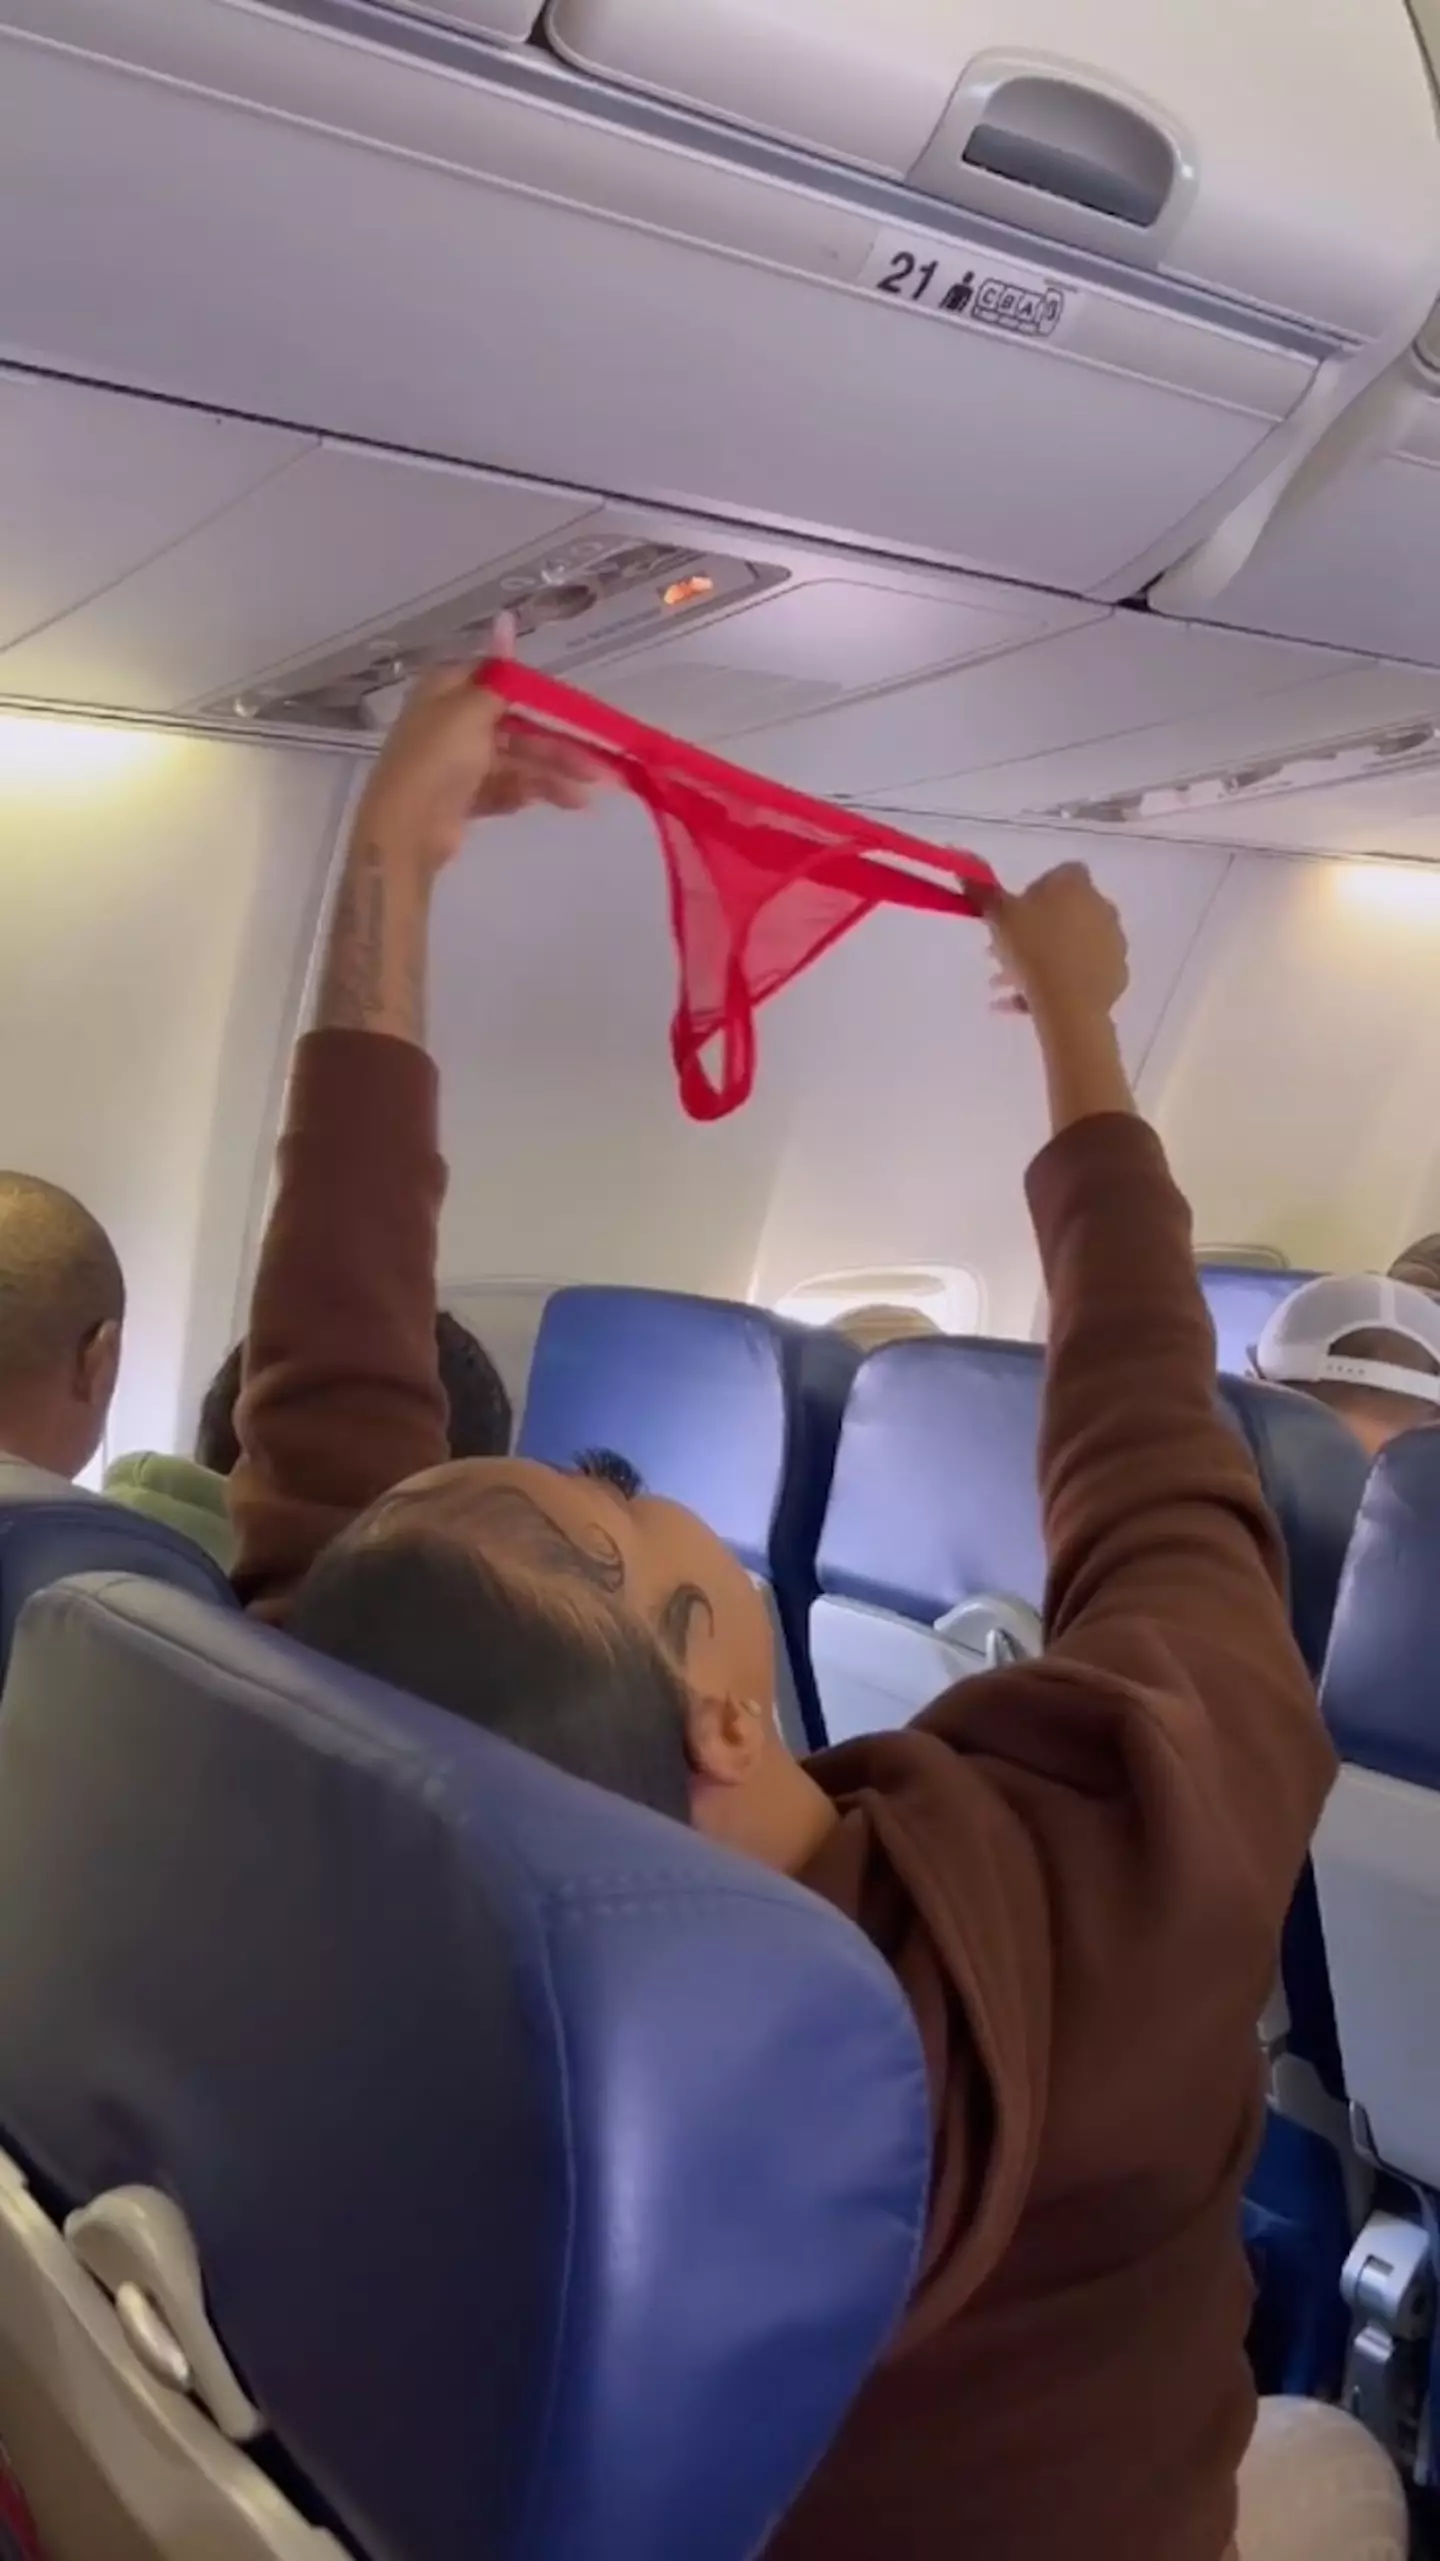 Vv Diamond appeared to be air-drying her red thong in front of the entire plane.